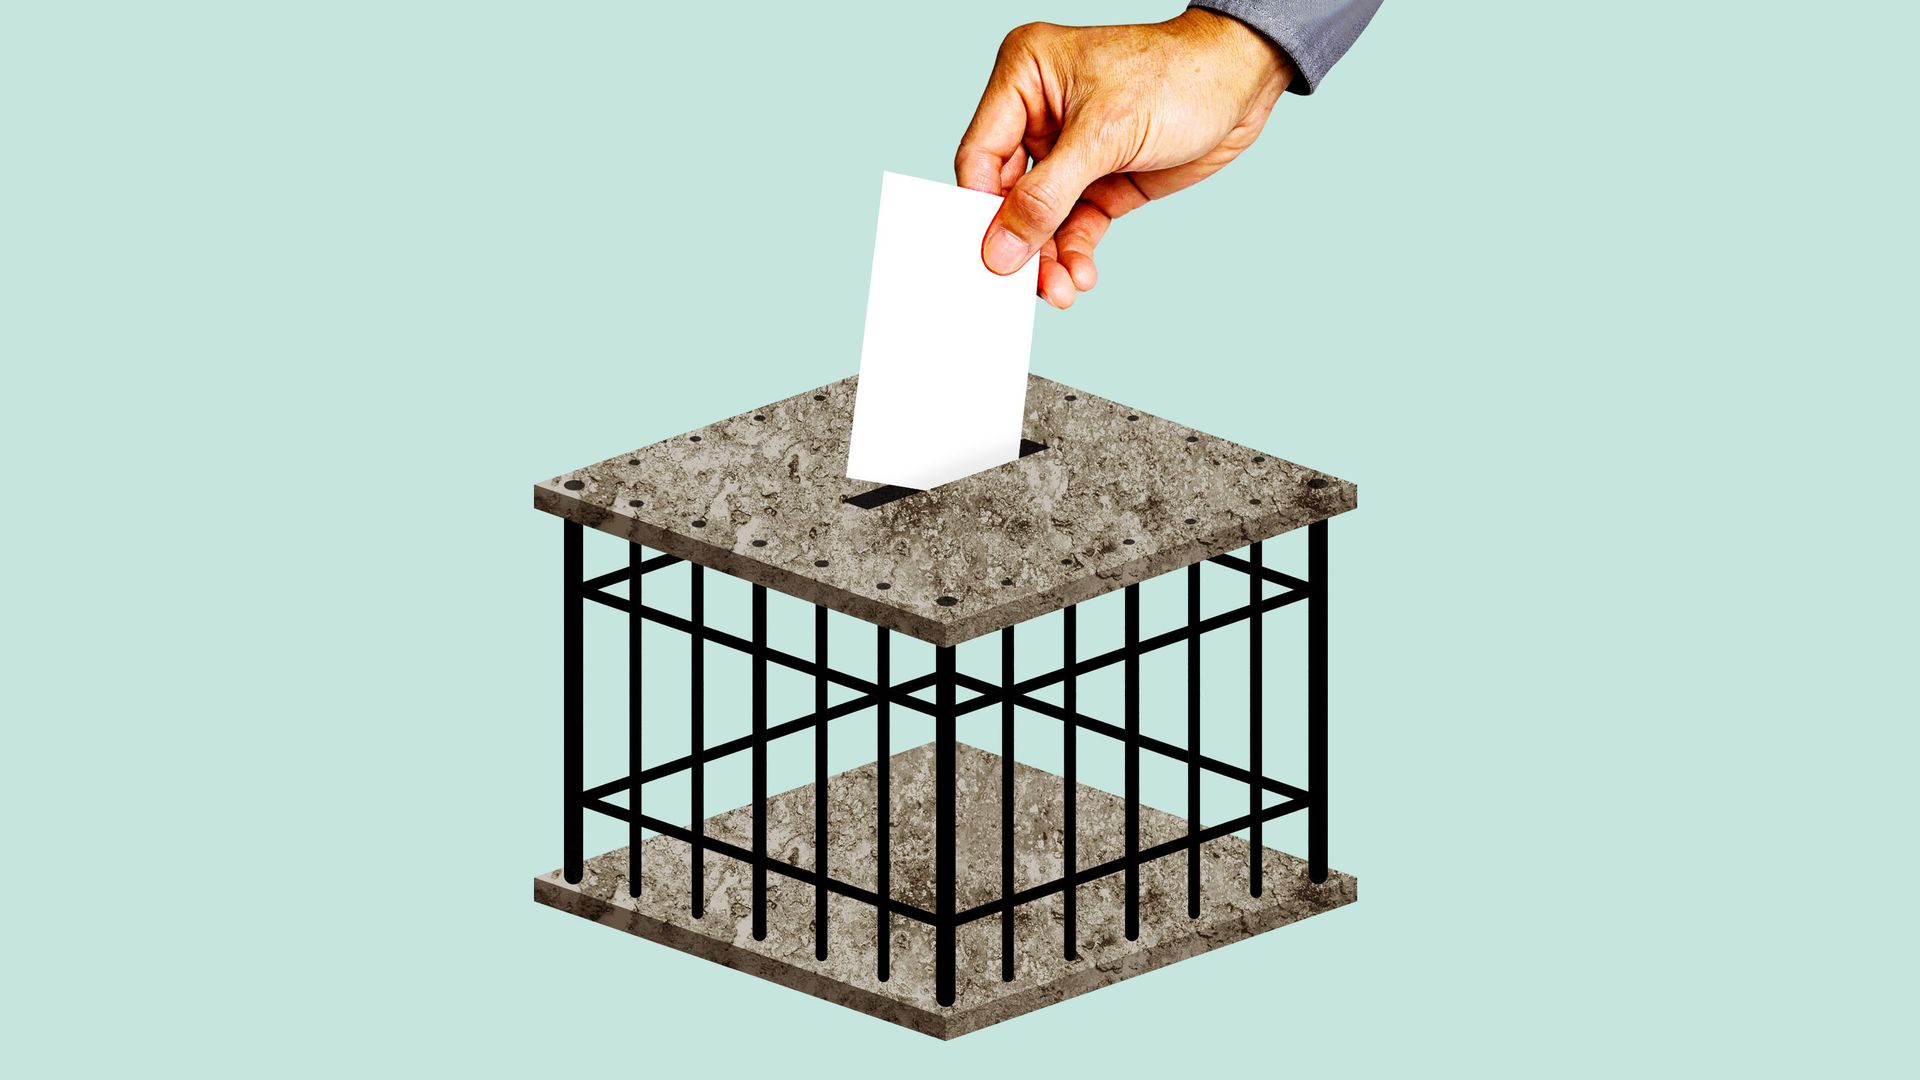 An illustration of someone cast a ballot into a jail cell.